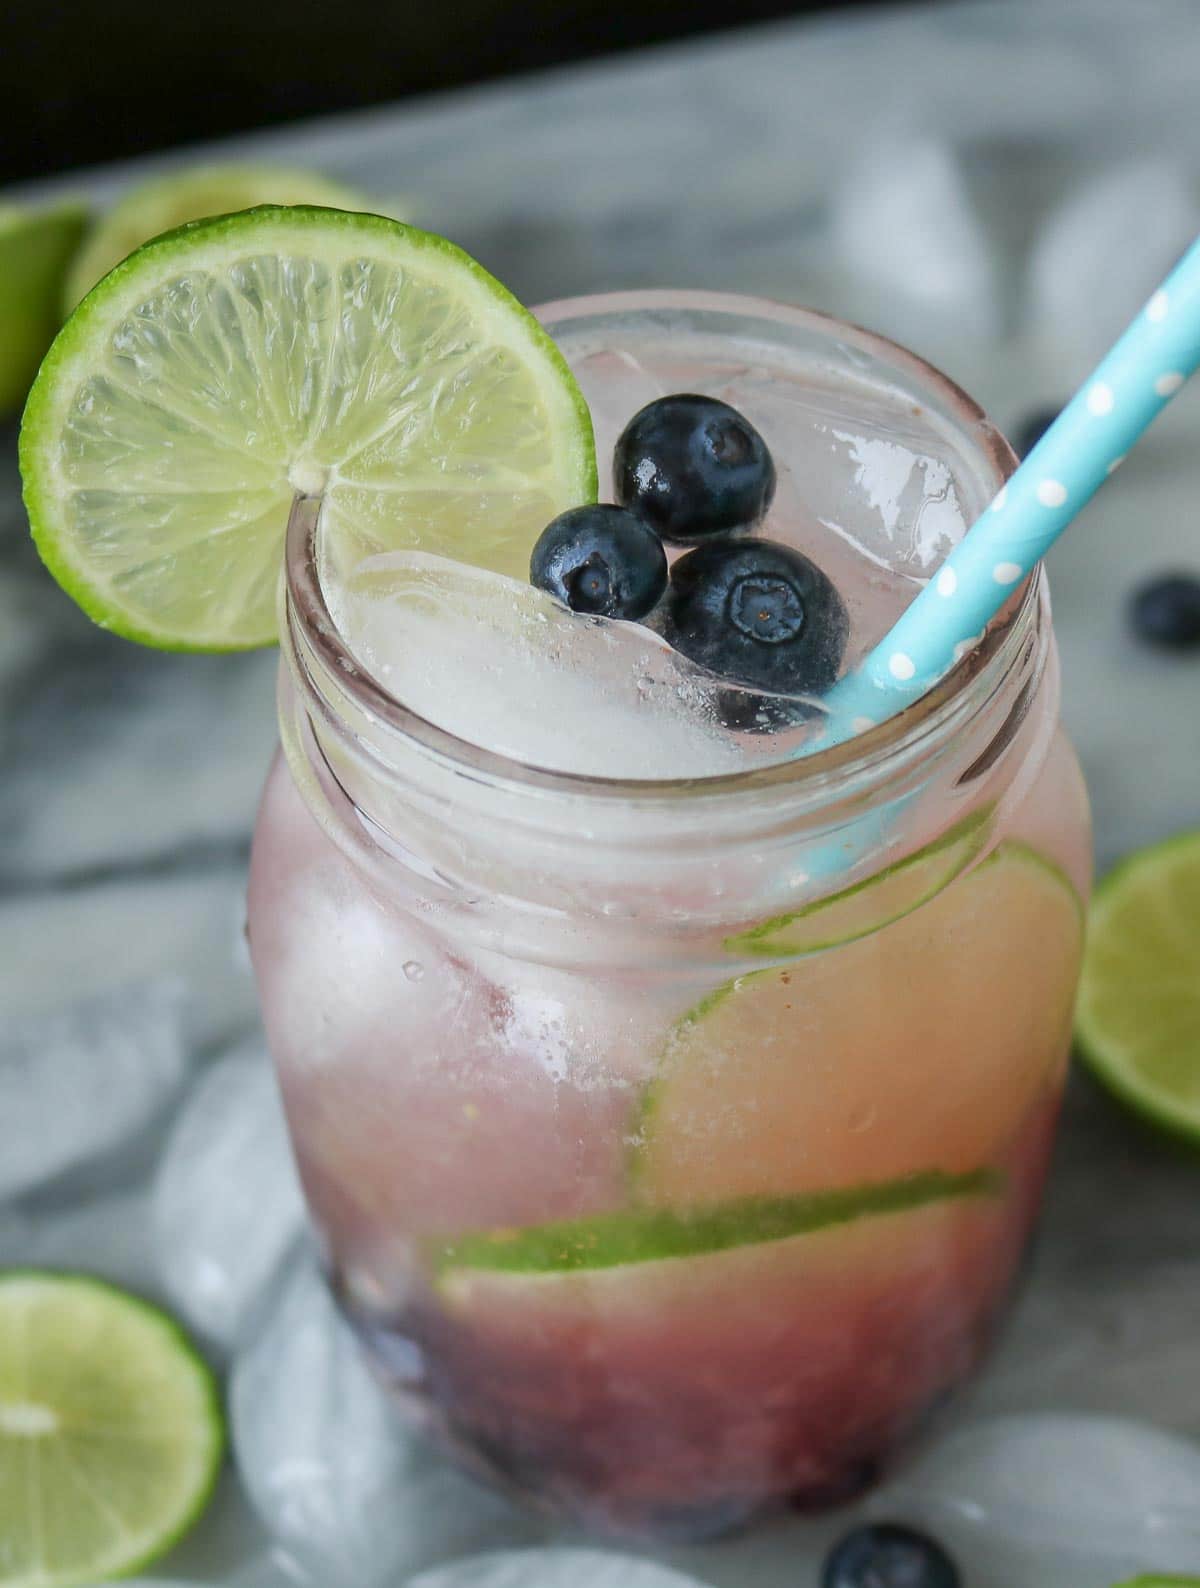 Blueberry and lime mocktail in a glass jar garnished with blueberries and lime.